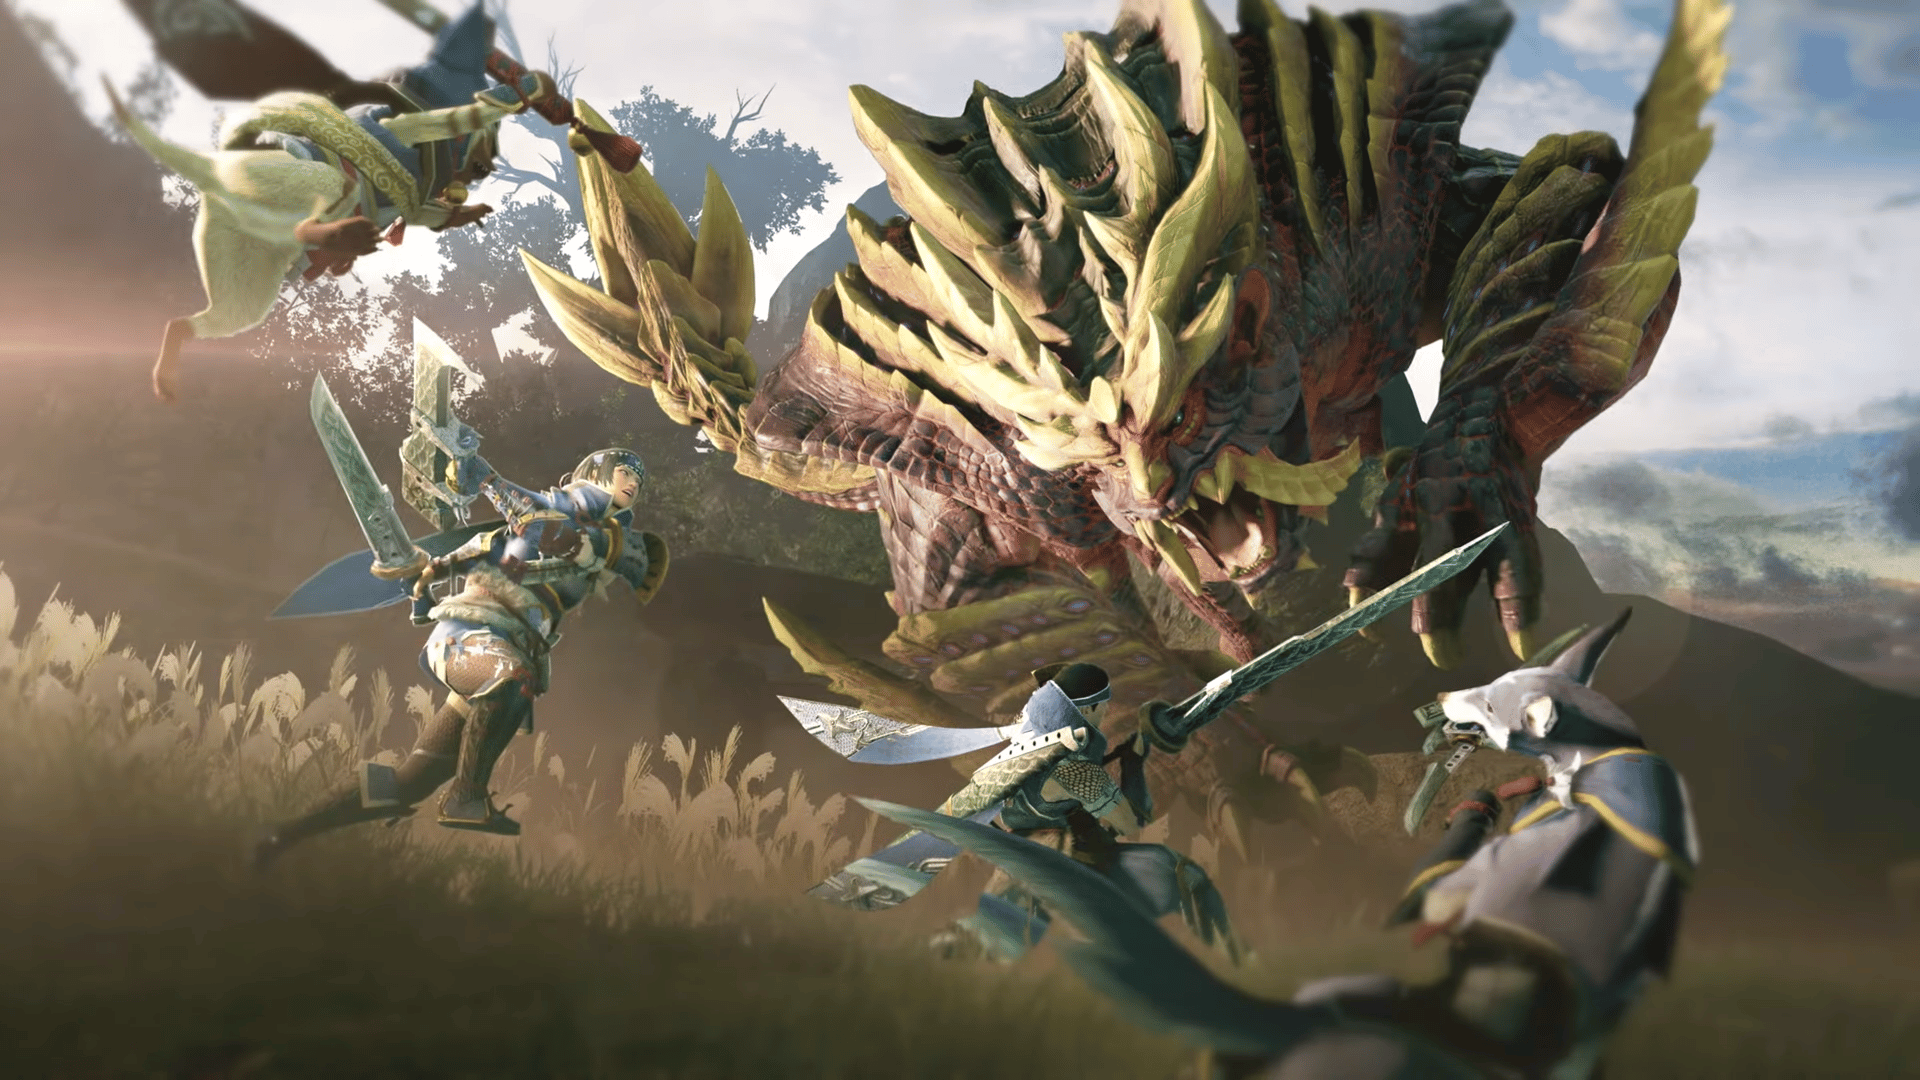 Is Monster Hunter Rise coming to Xbox, PS5, or PC?